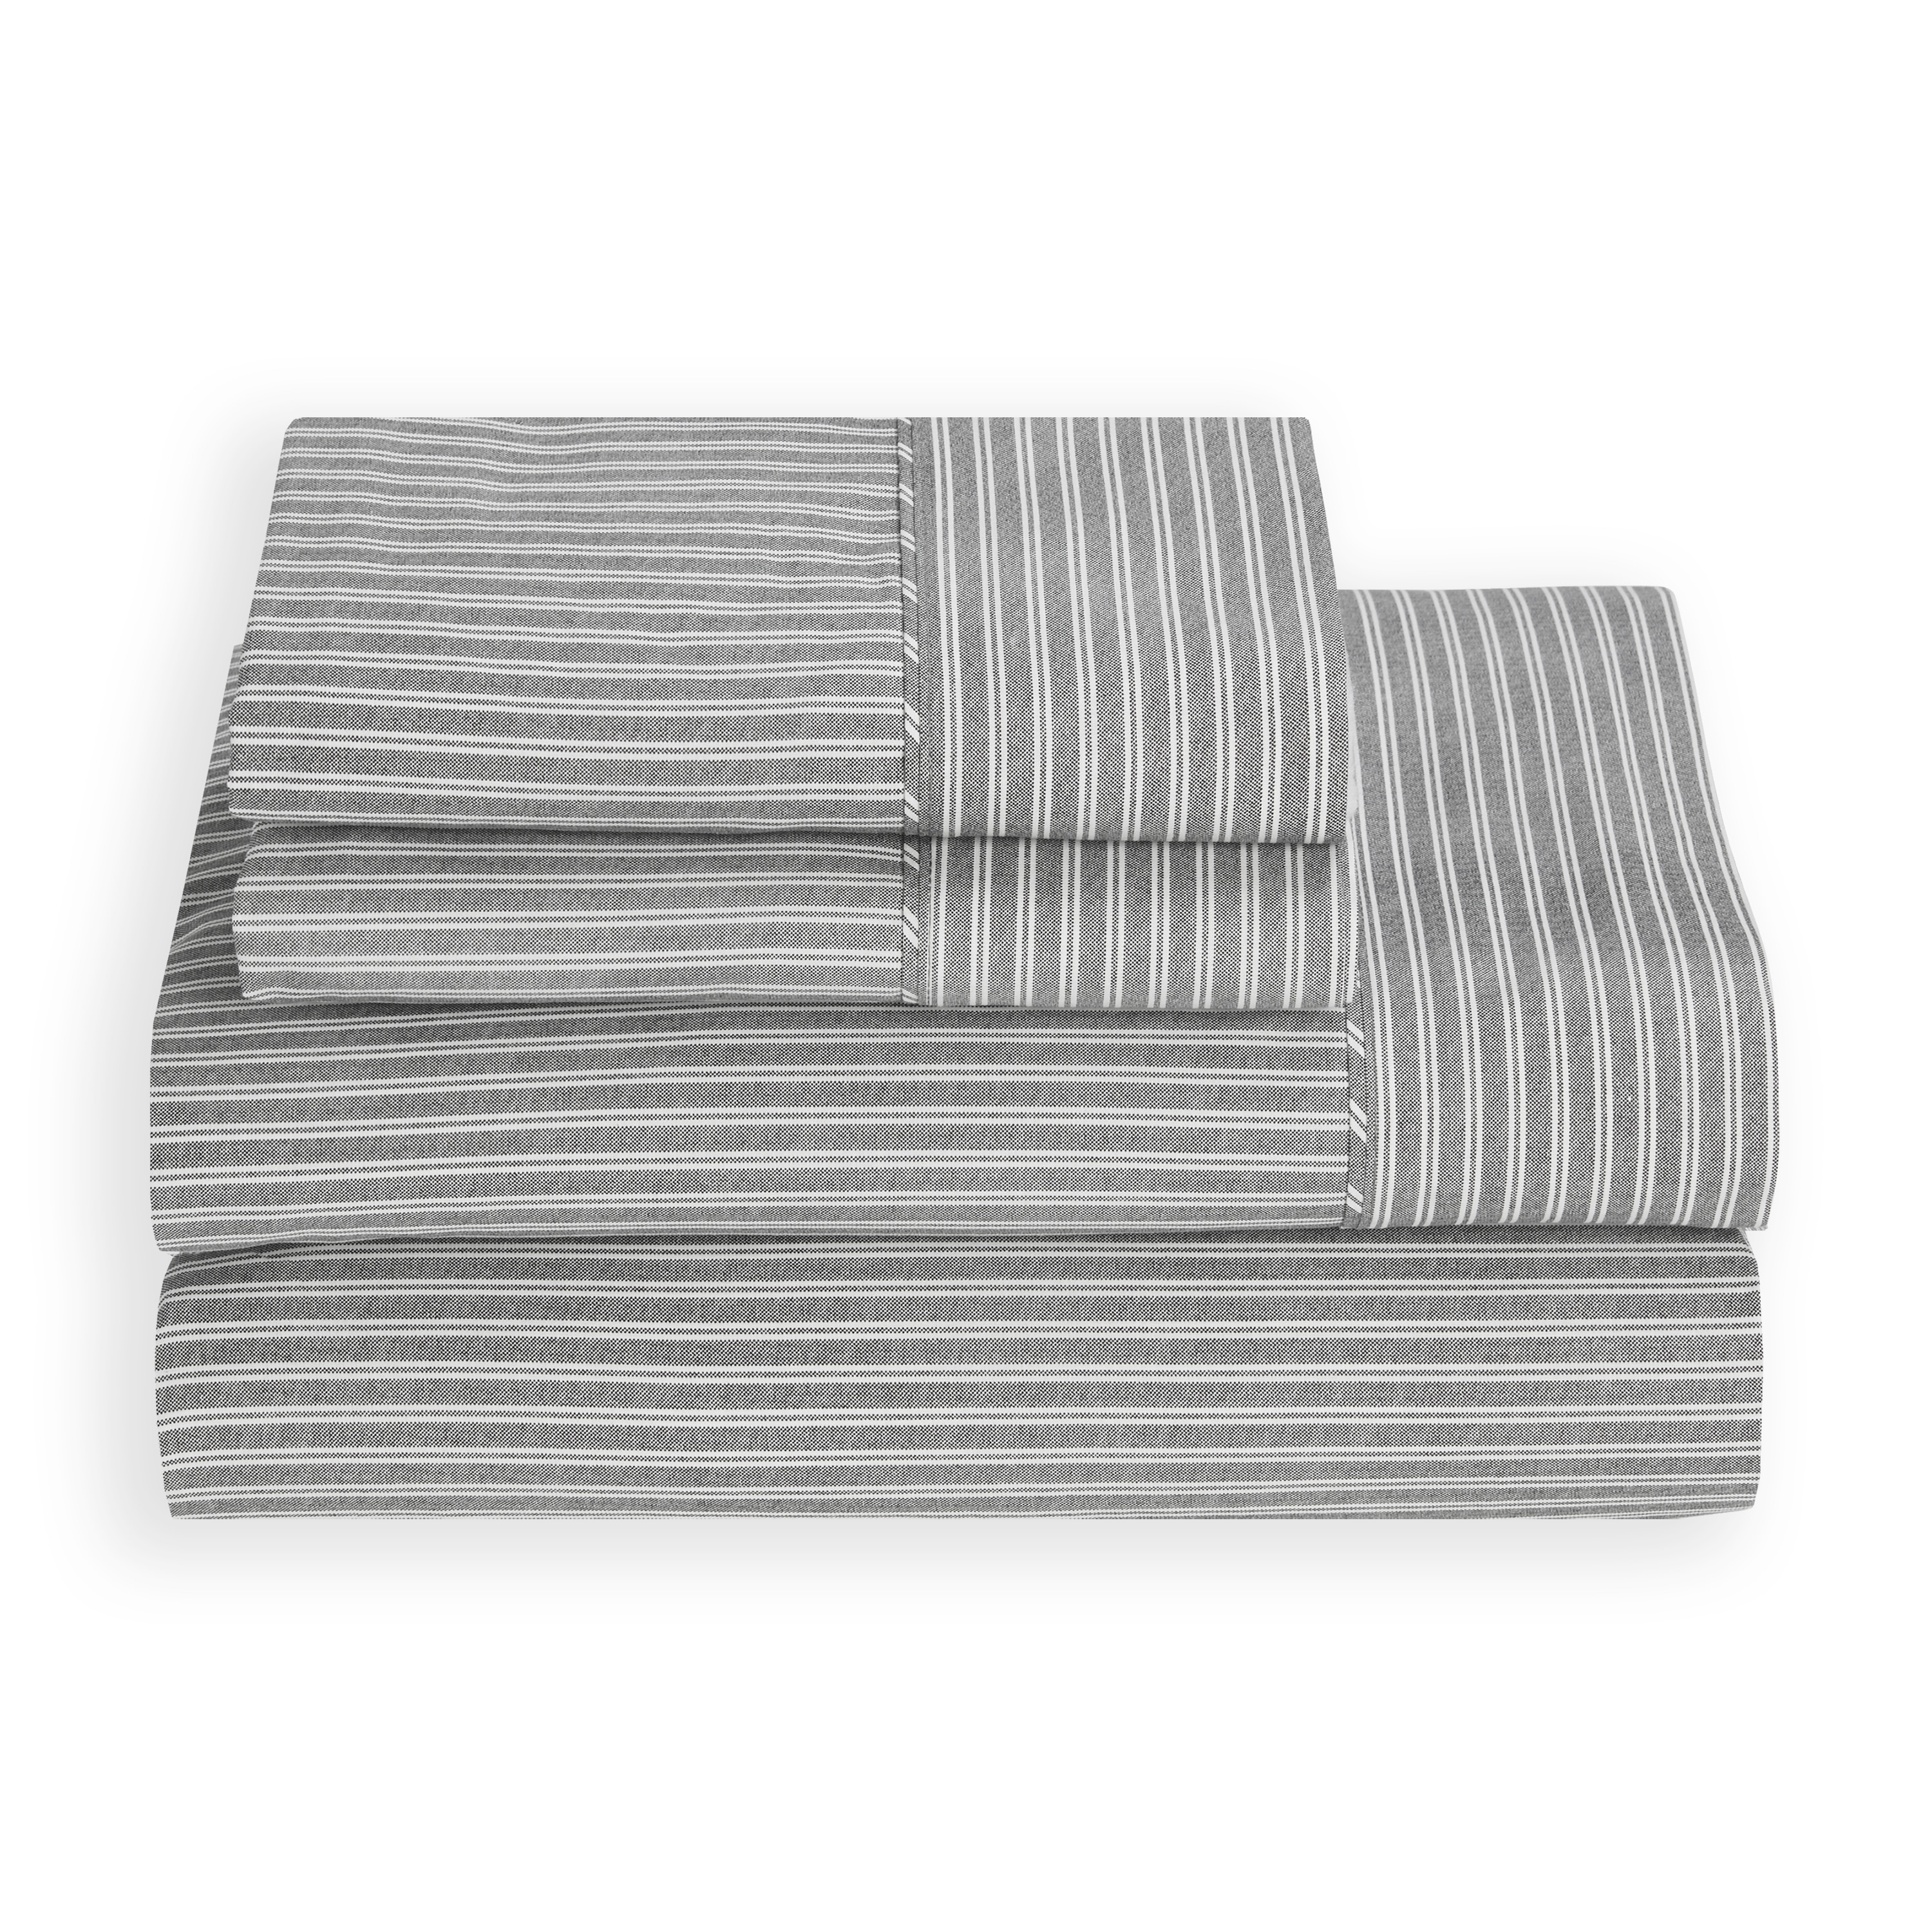 Tommy Hilfiger Sidgwick Dove Cotton Percale Sheet Set